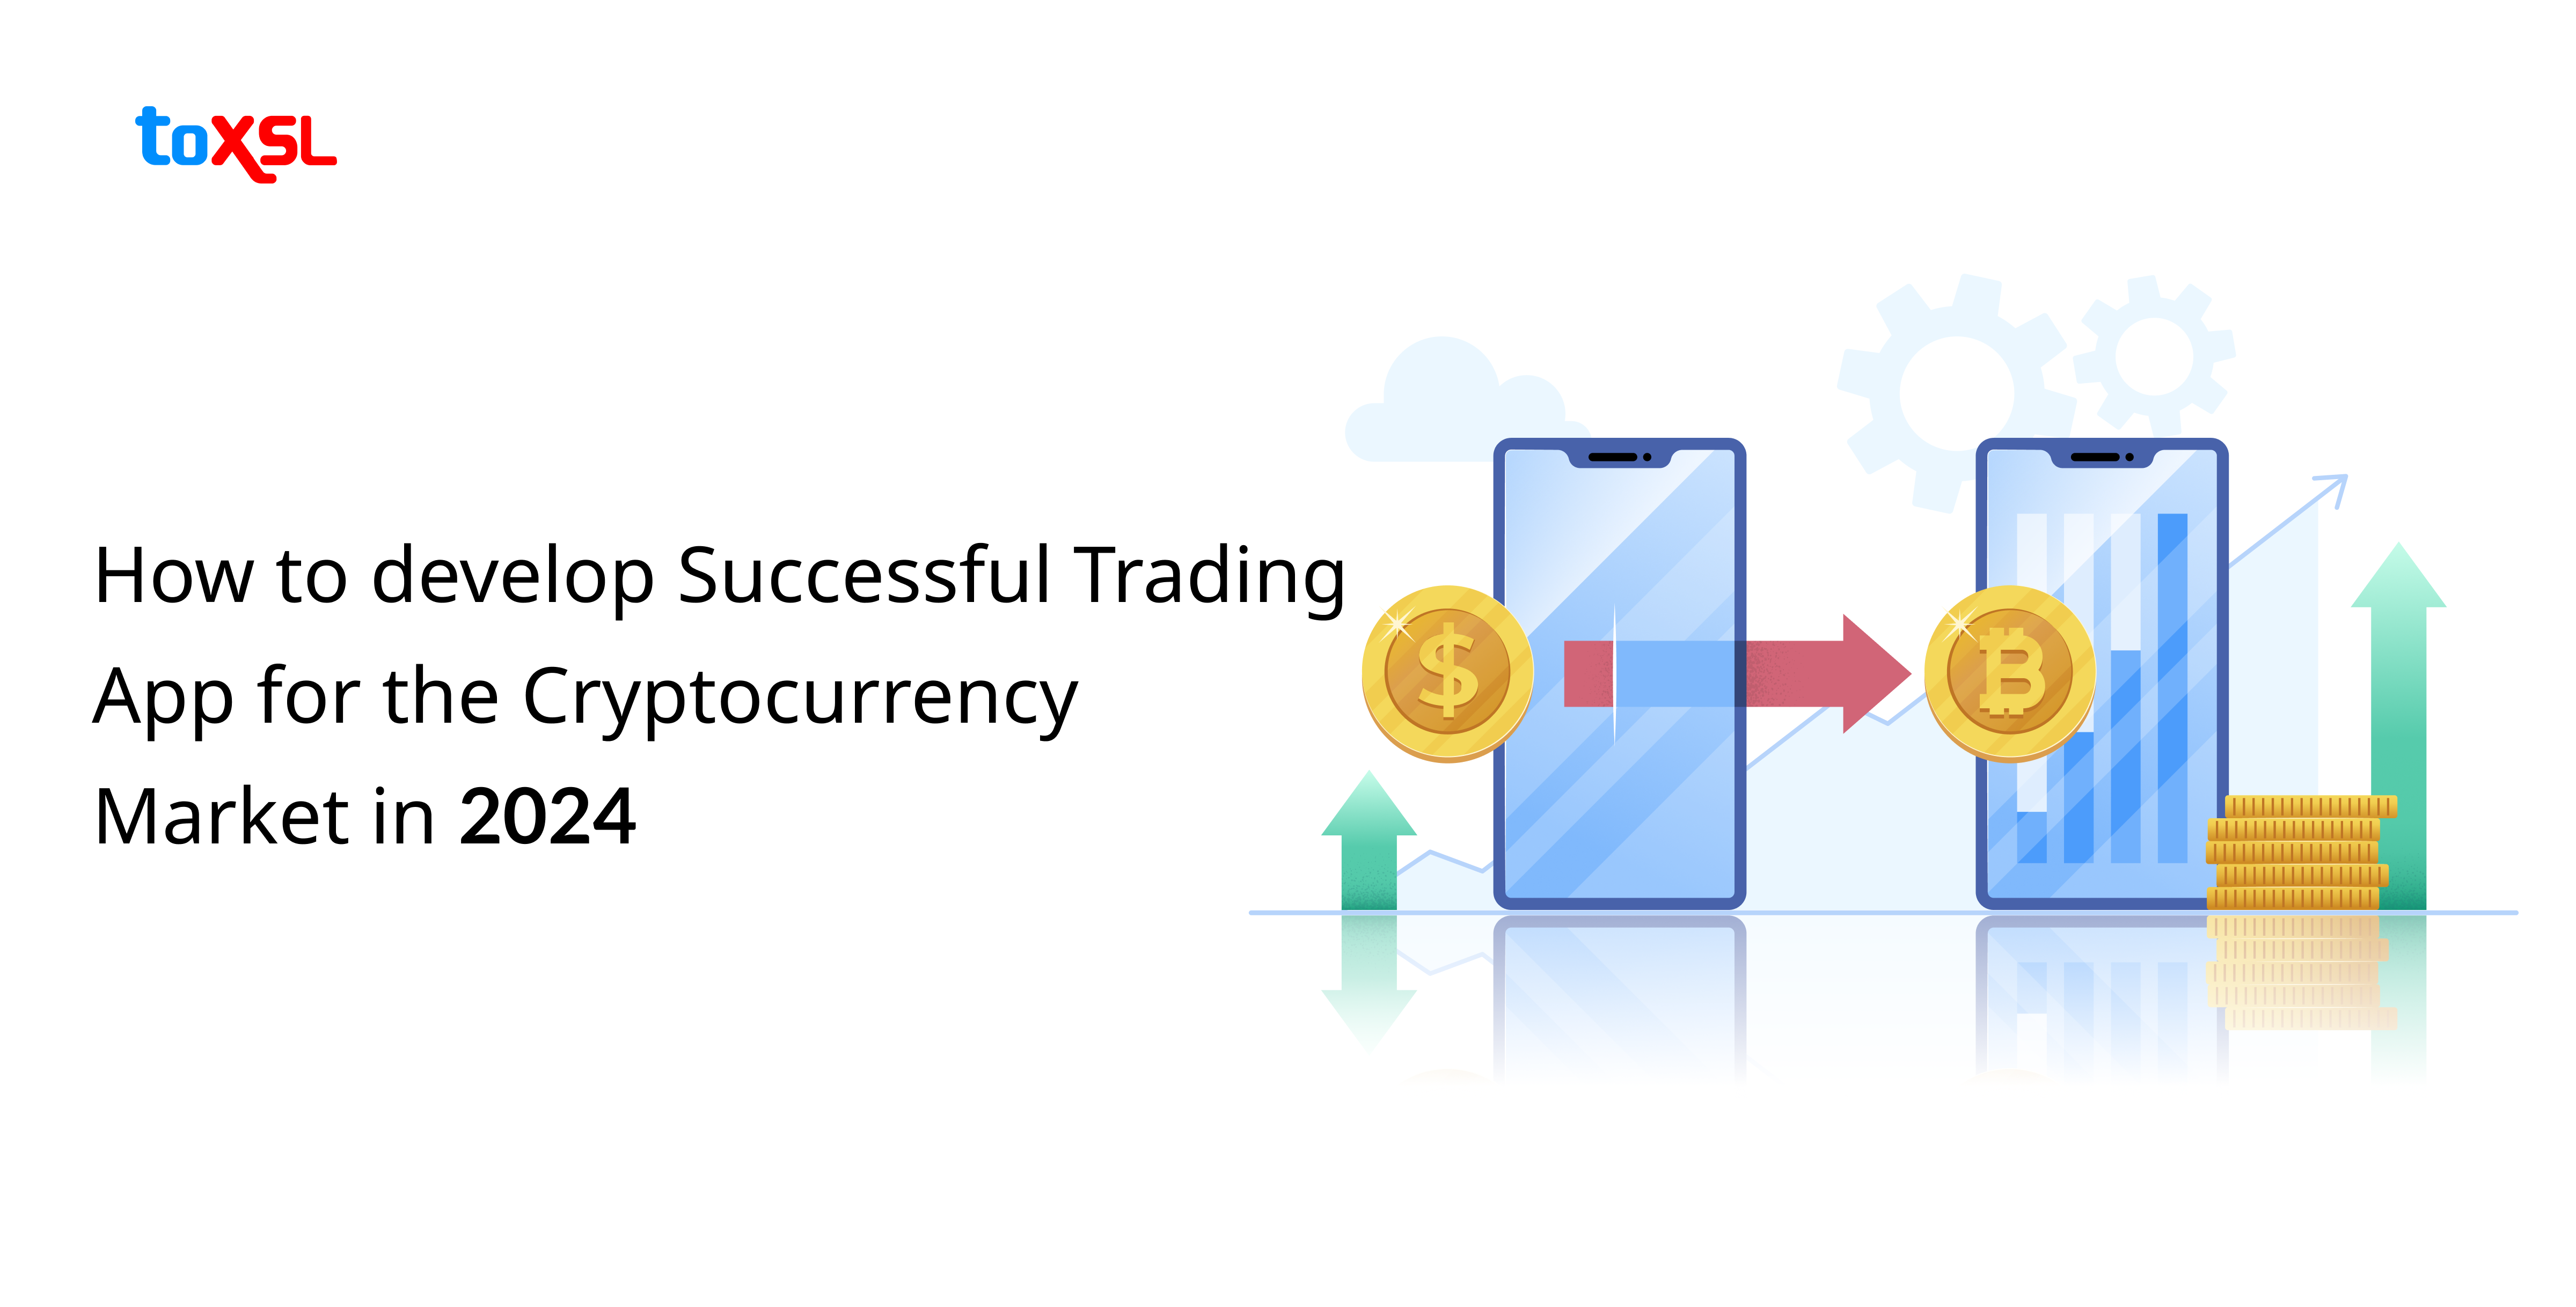 How to develop Successful Trading App for the Cryptocurrency Market in 2024